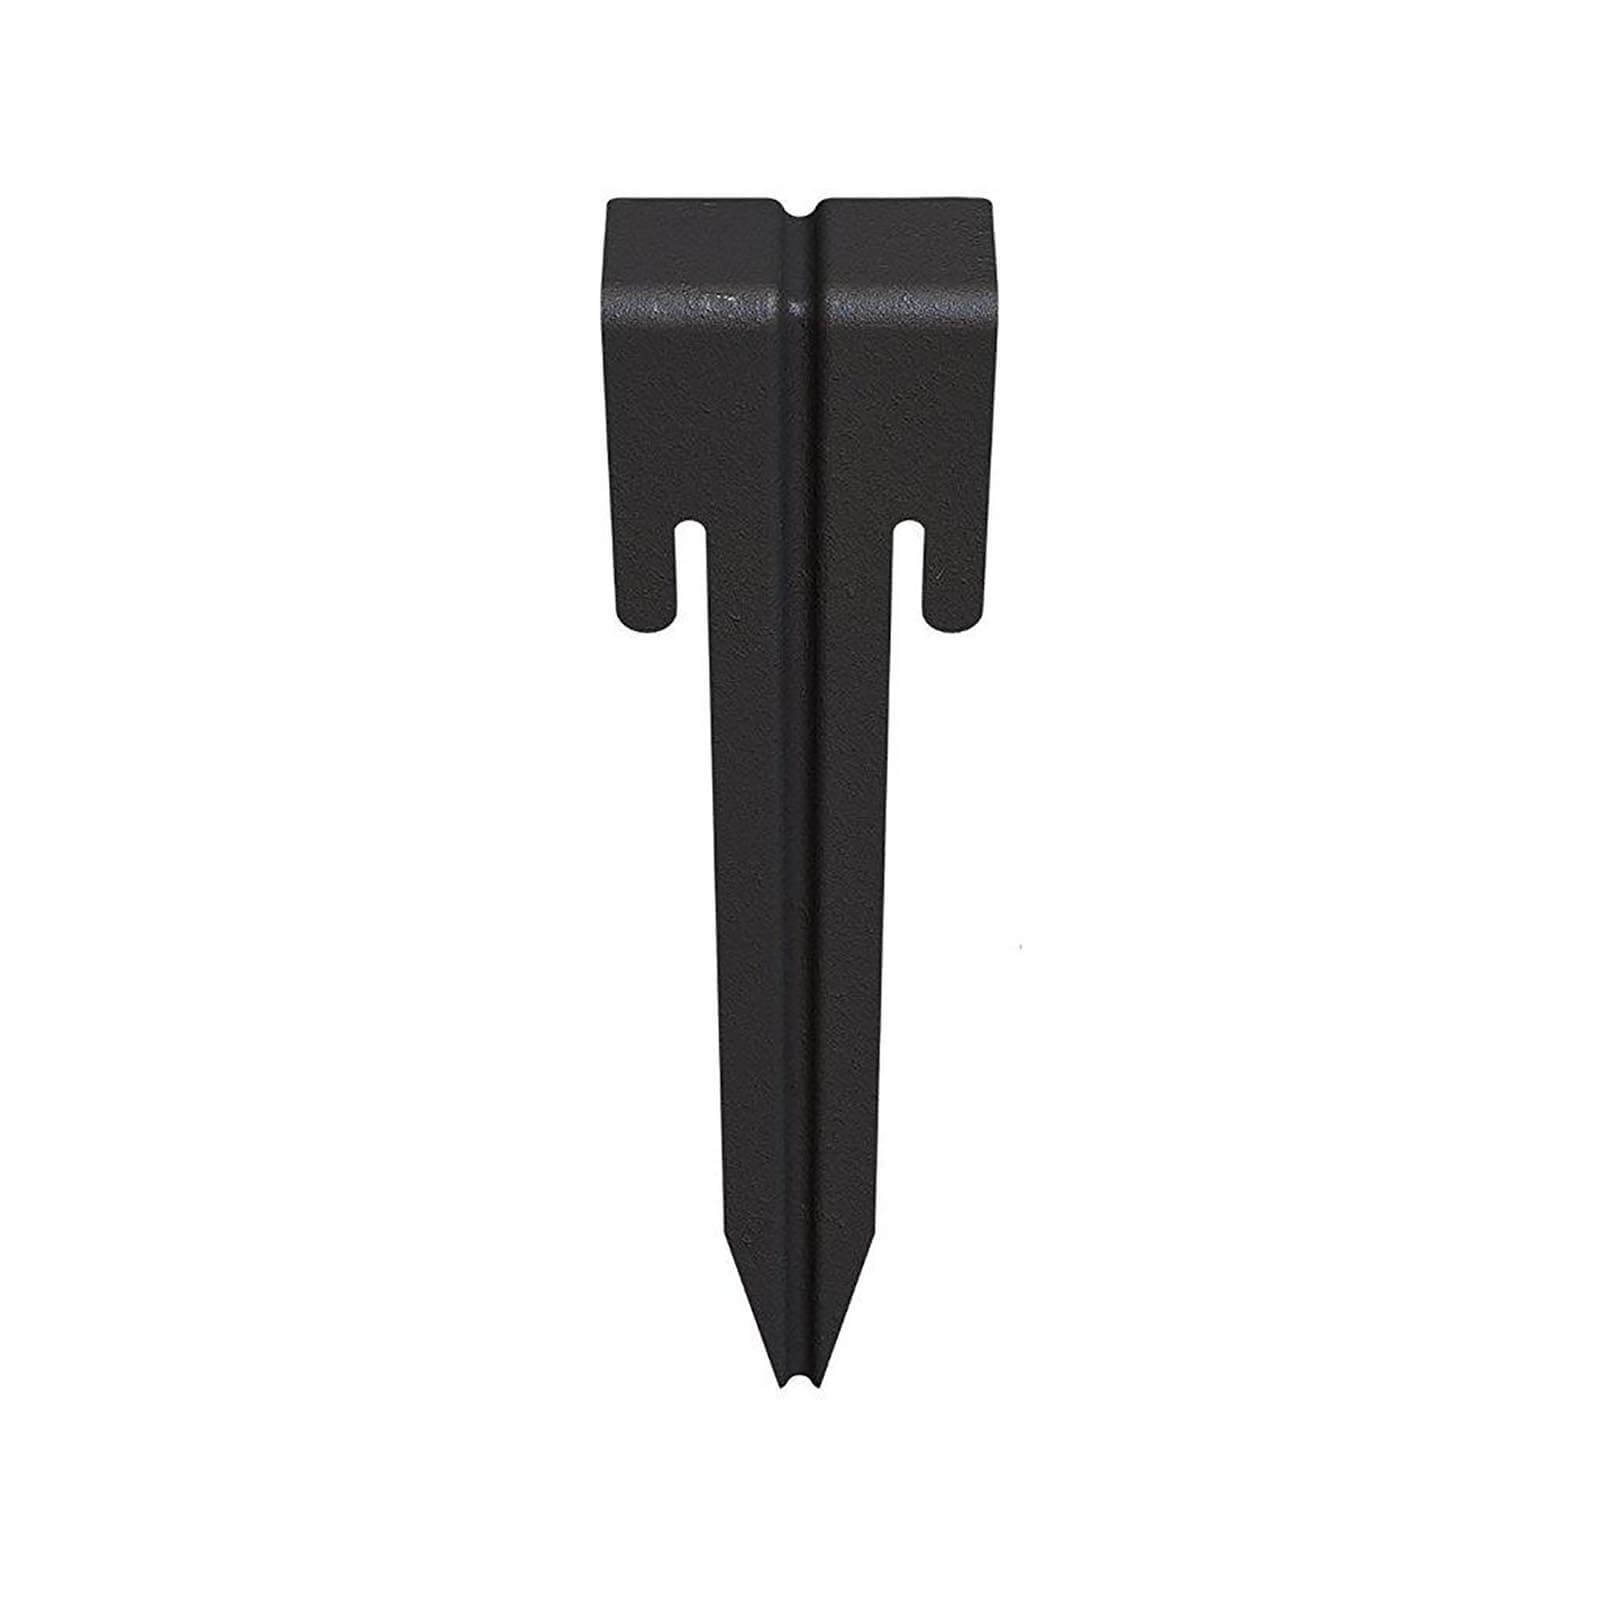 Black Universal Stakes - 3 Pack